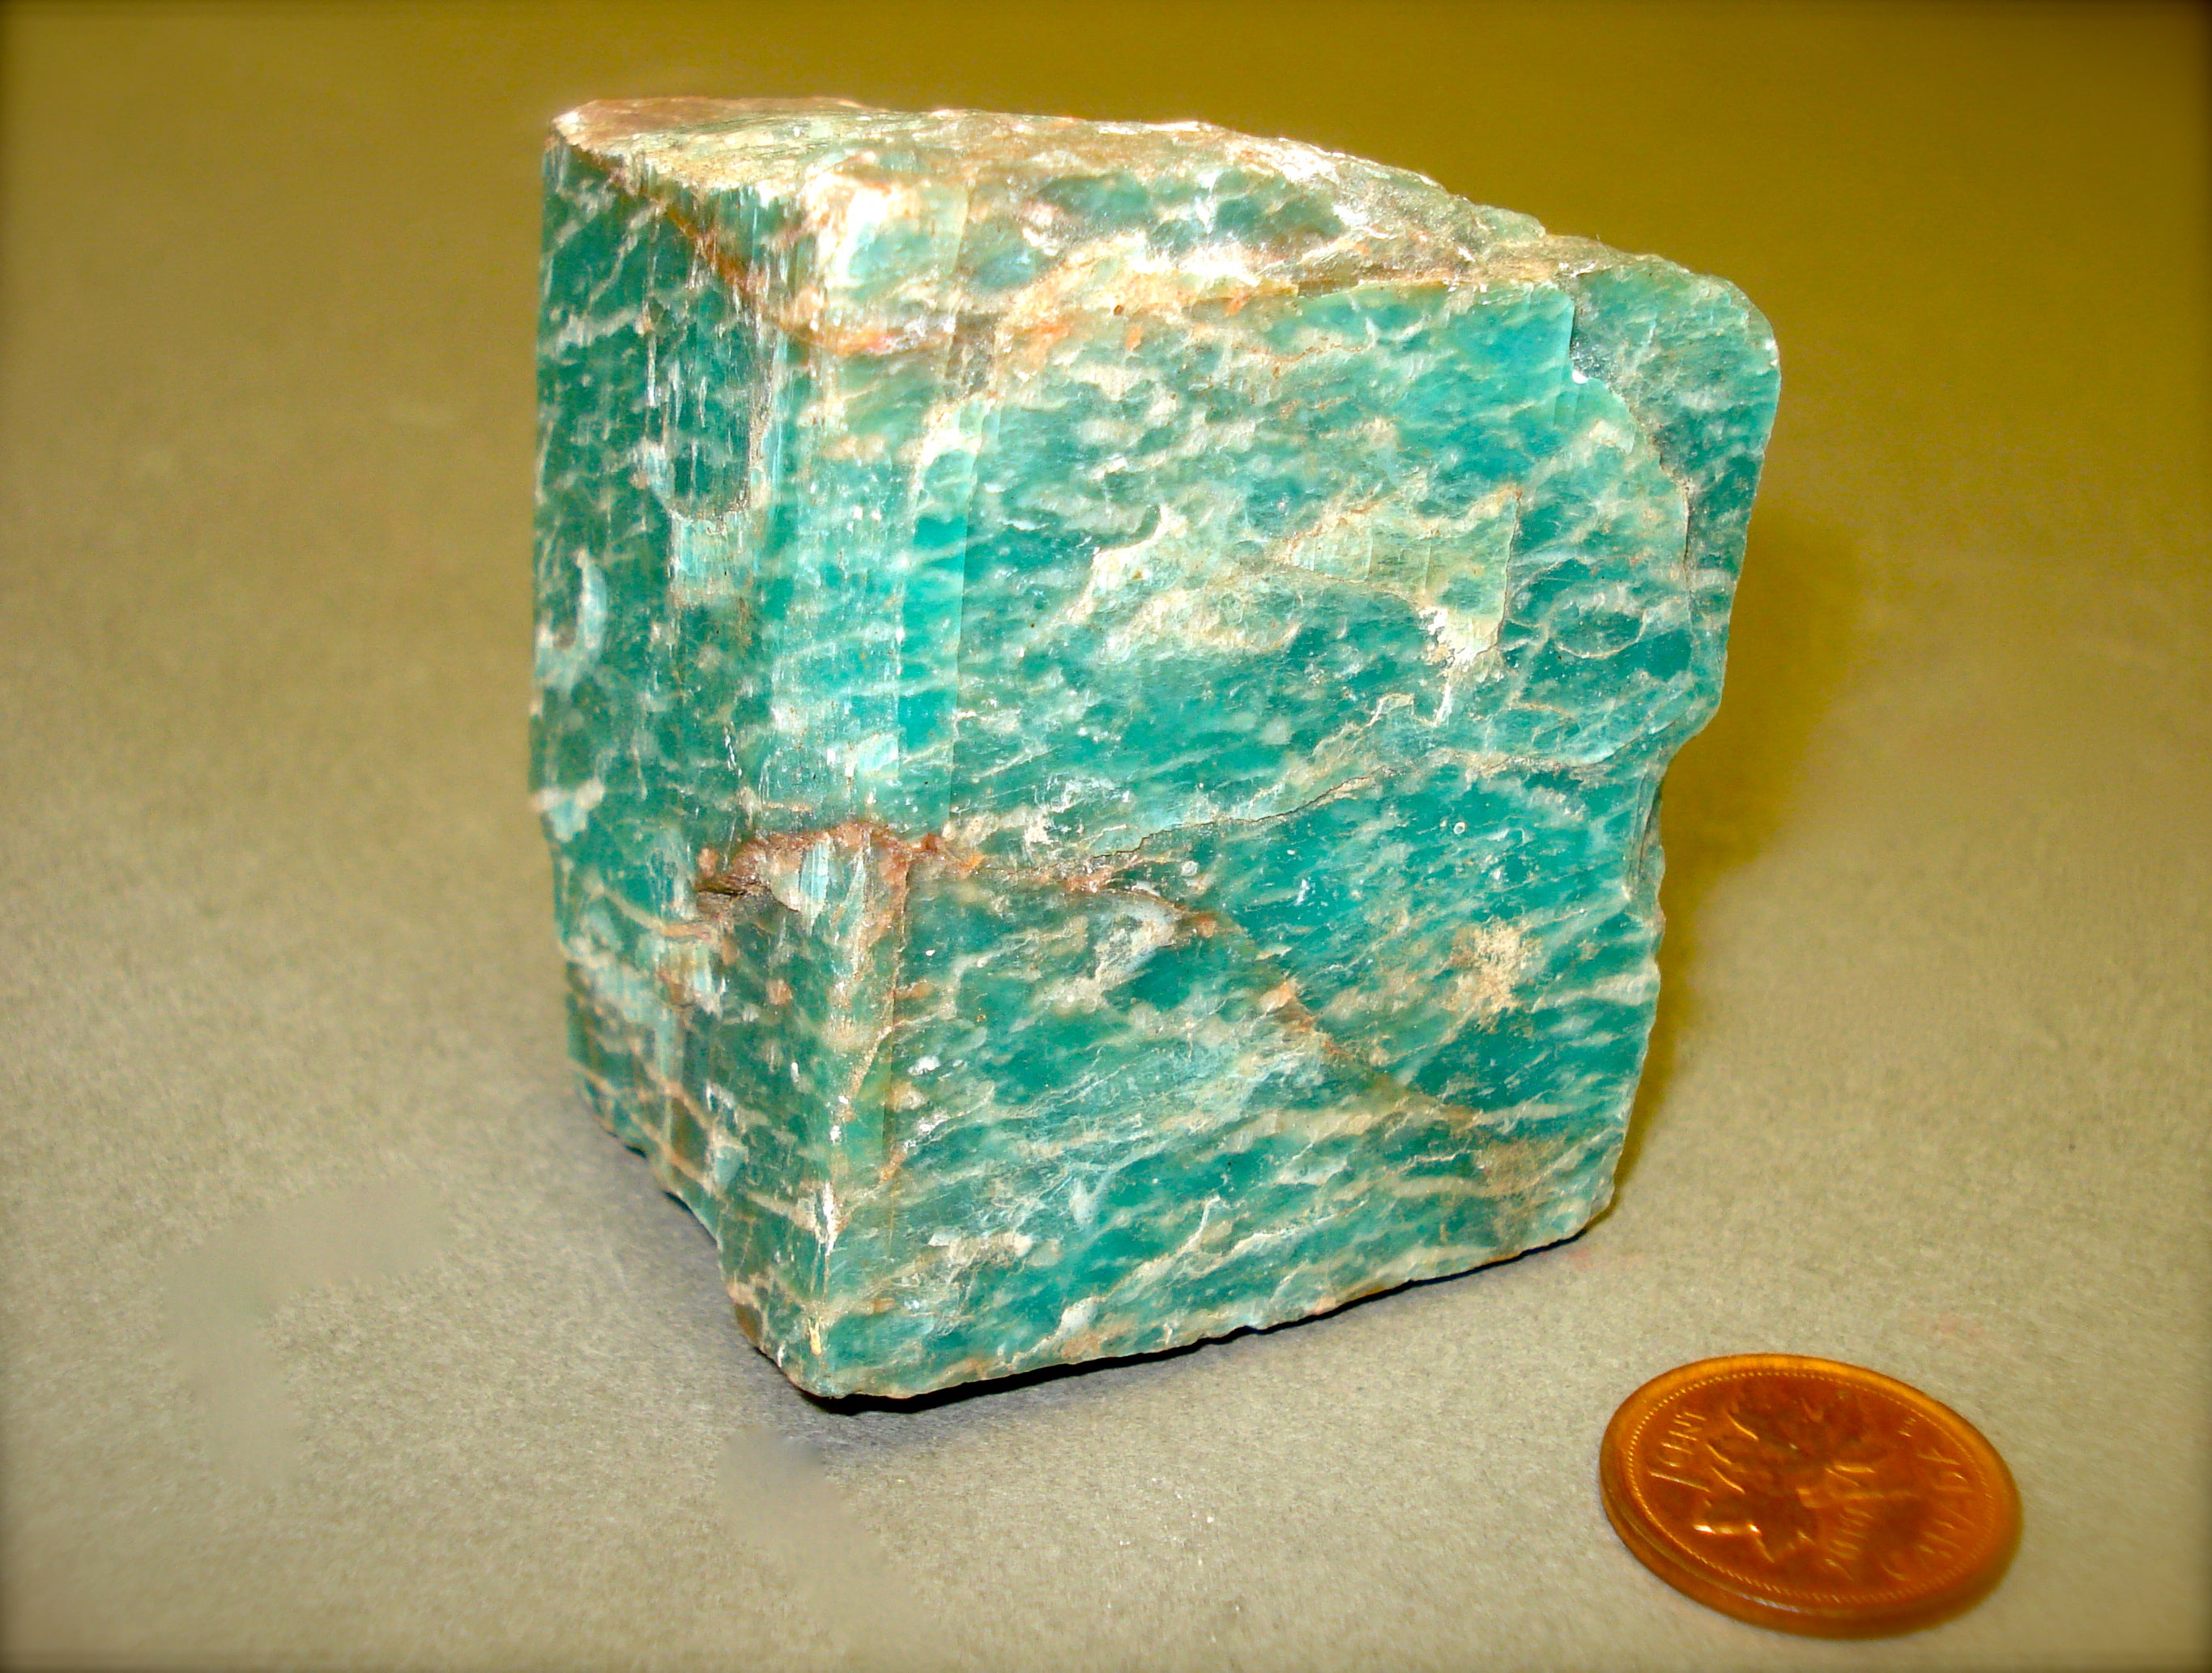 Cube-like block of vibrant green mineral